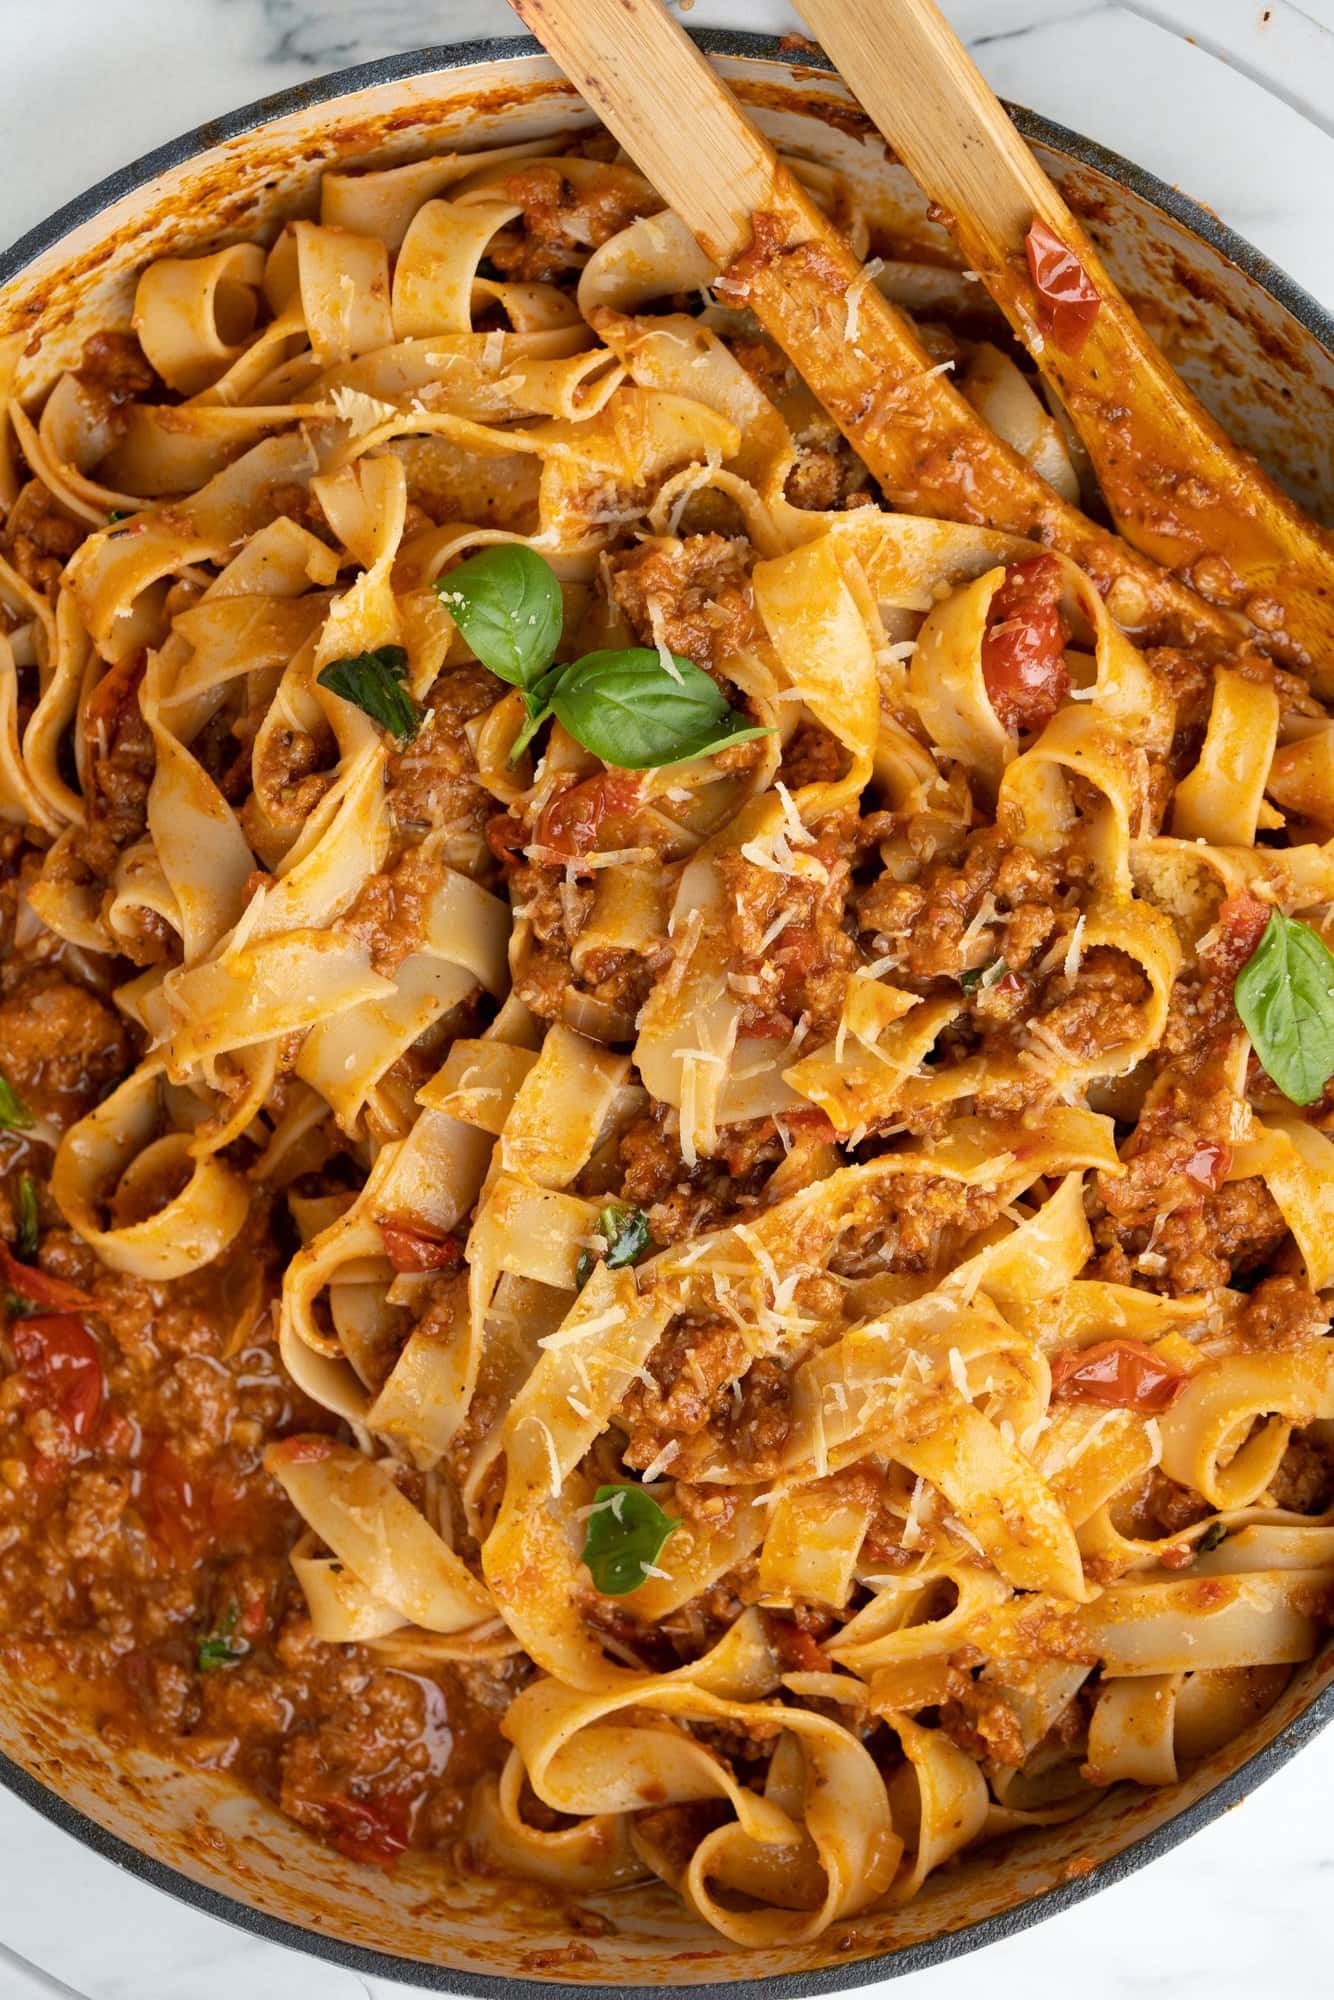 Pappardelle pasta tossed in a tomato based Italian sausage sauce. 